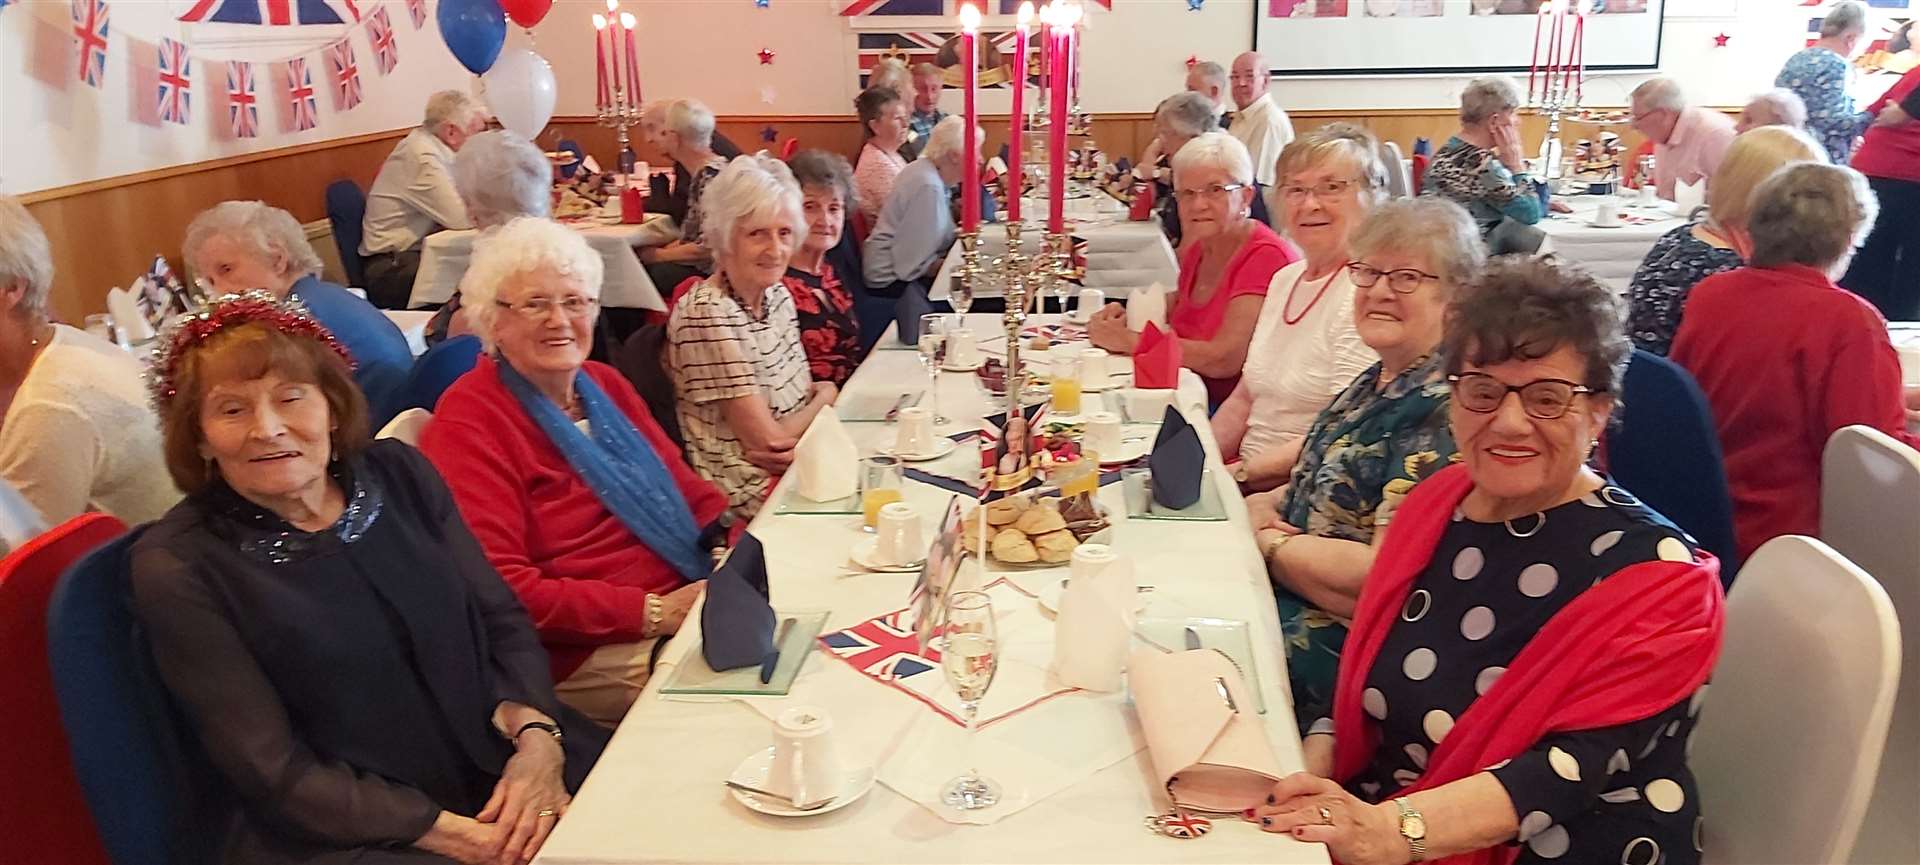 Eleanor Simpson (93), second from left at this table, says the Queen has done her job very well.